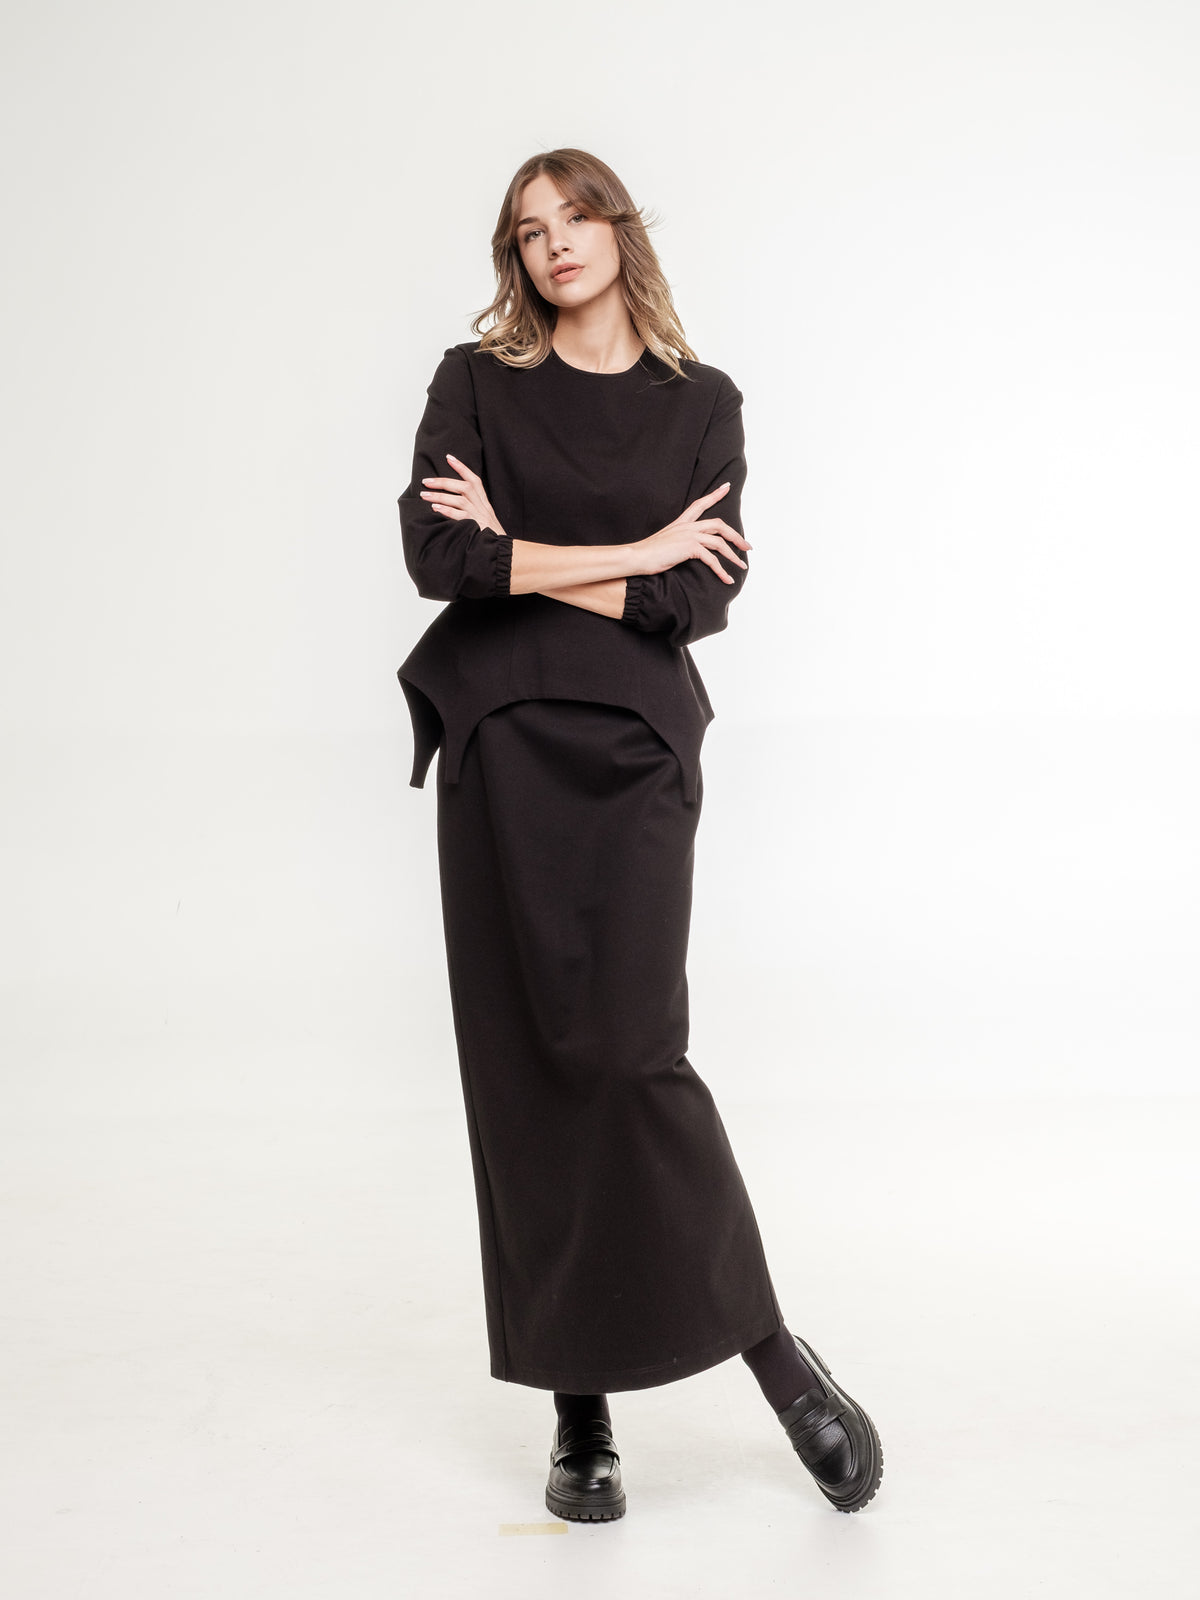 costume black top with long sleeve and long skirt 